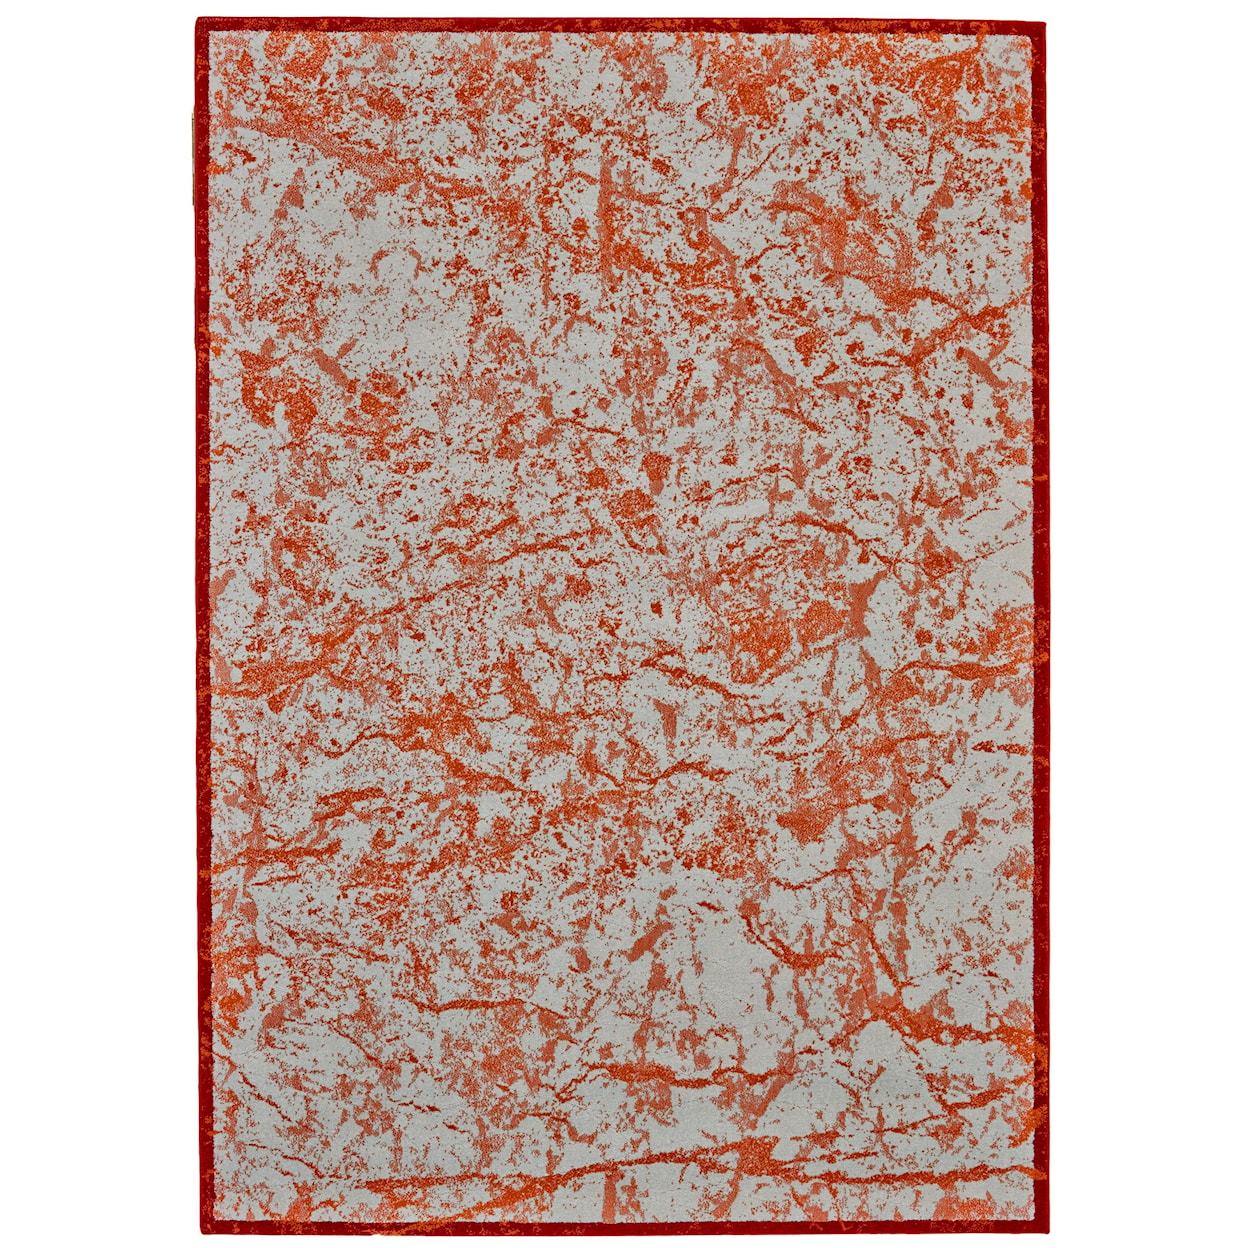 Feizy Rugs Cambrian Tangerine 5' x 8' Area Rug